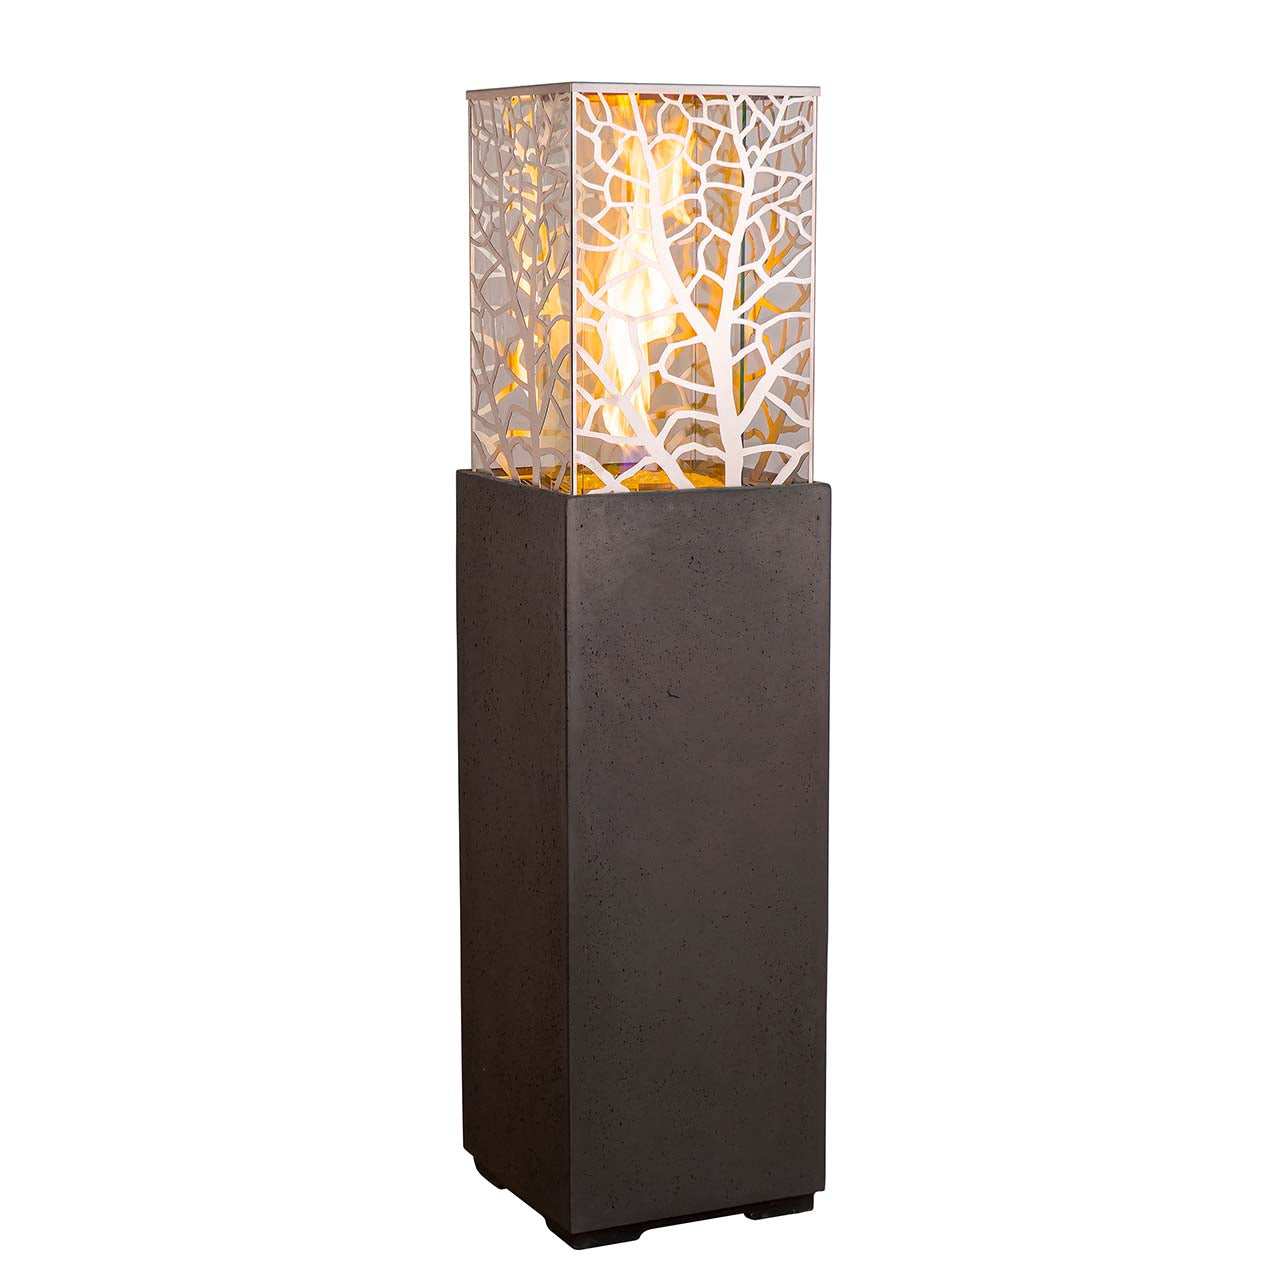 American Fyre Designs Magnolia Lantern with Electronic Ignition + Free Cover